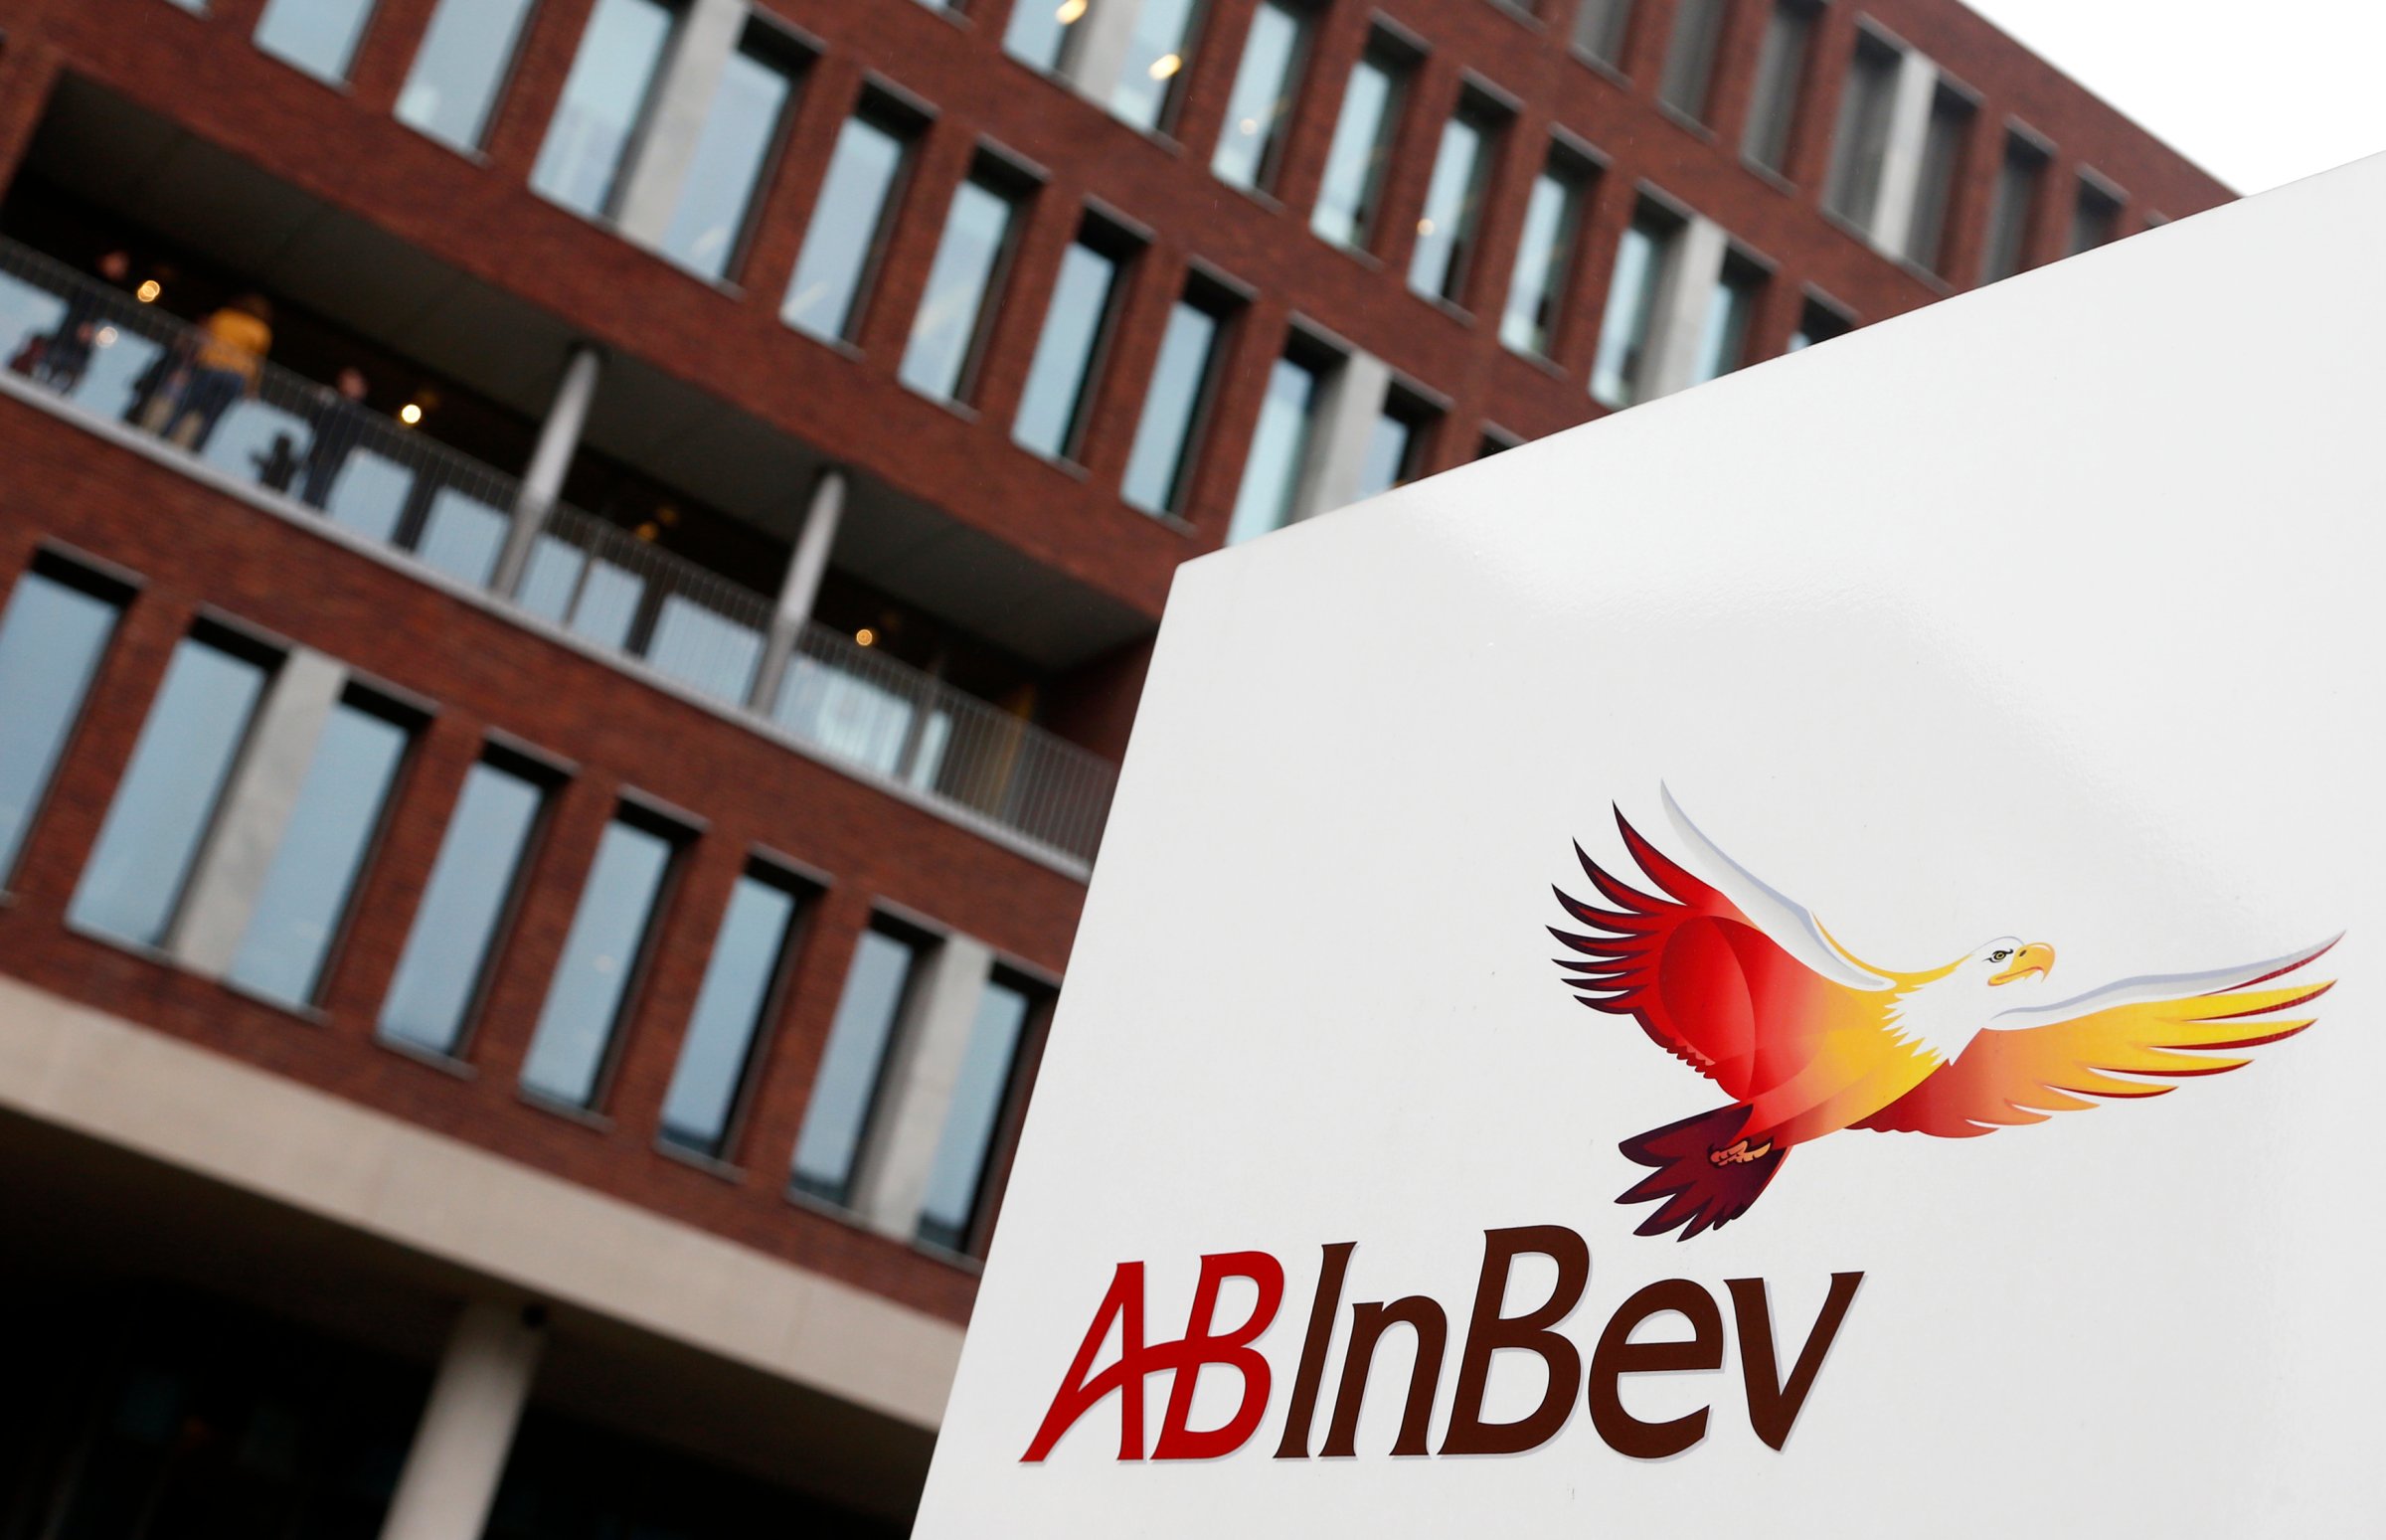 Anheuser-Busch InBev logo outside the brewery headquarters in Leuven